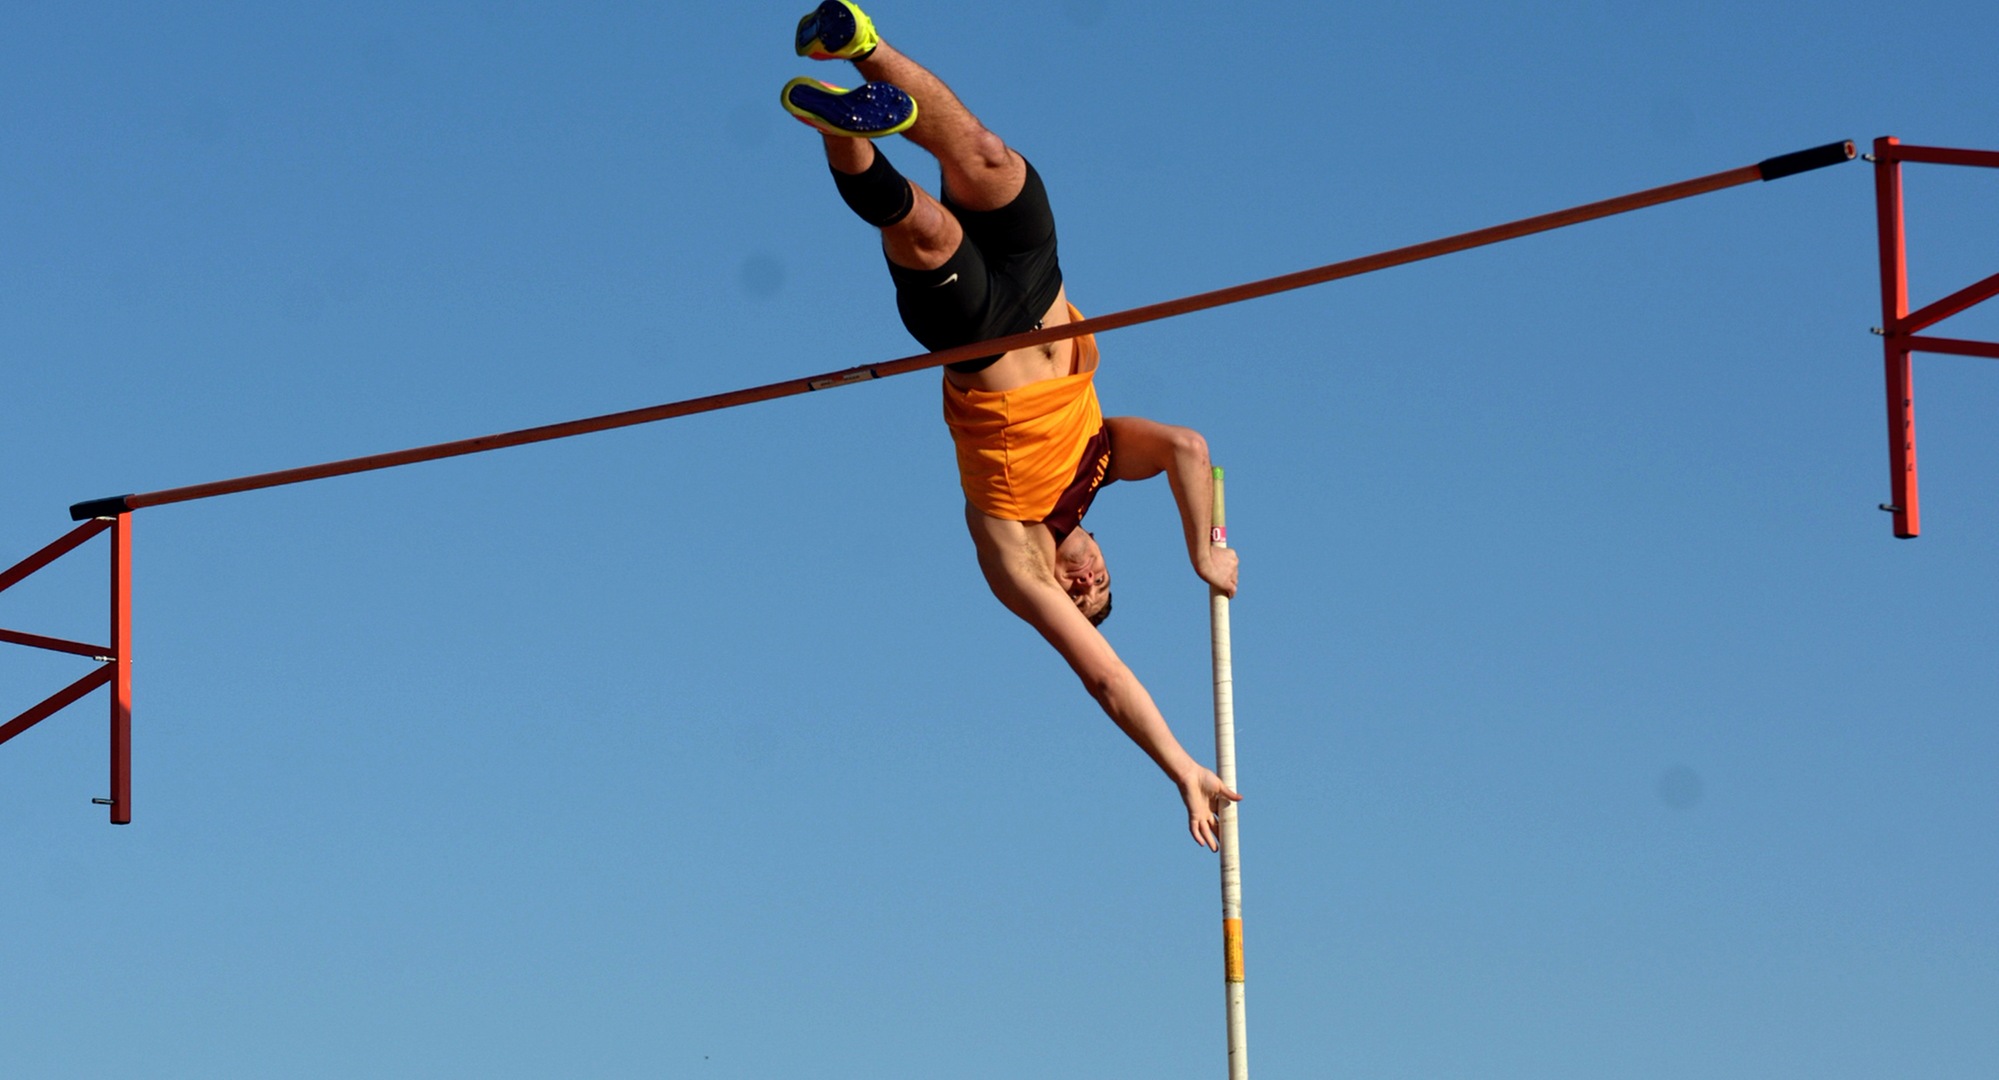 Junior Eli Beachy finished second in the pole vault at the Lyle Hokanson Classic at NDSU. He cleared 14-11 which is the fourth best in school history.